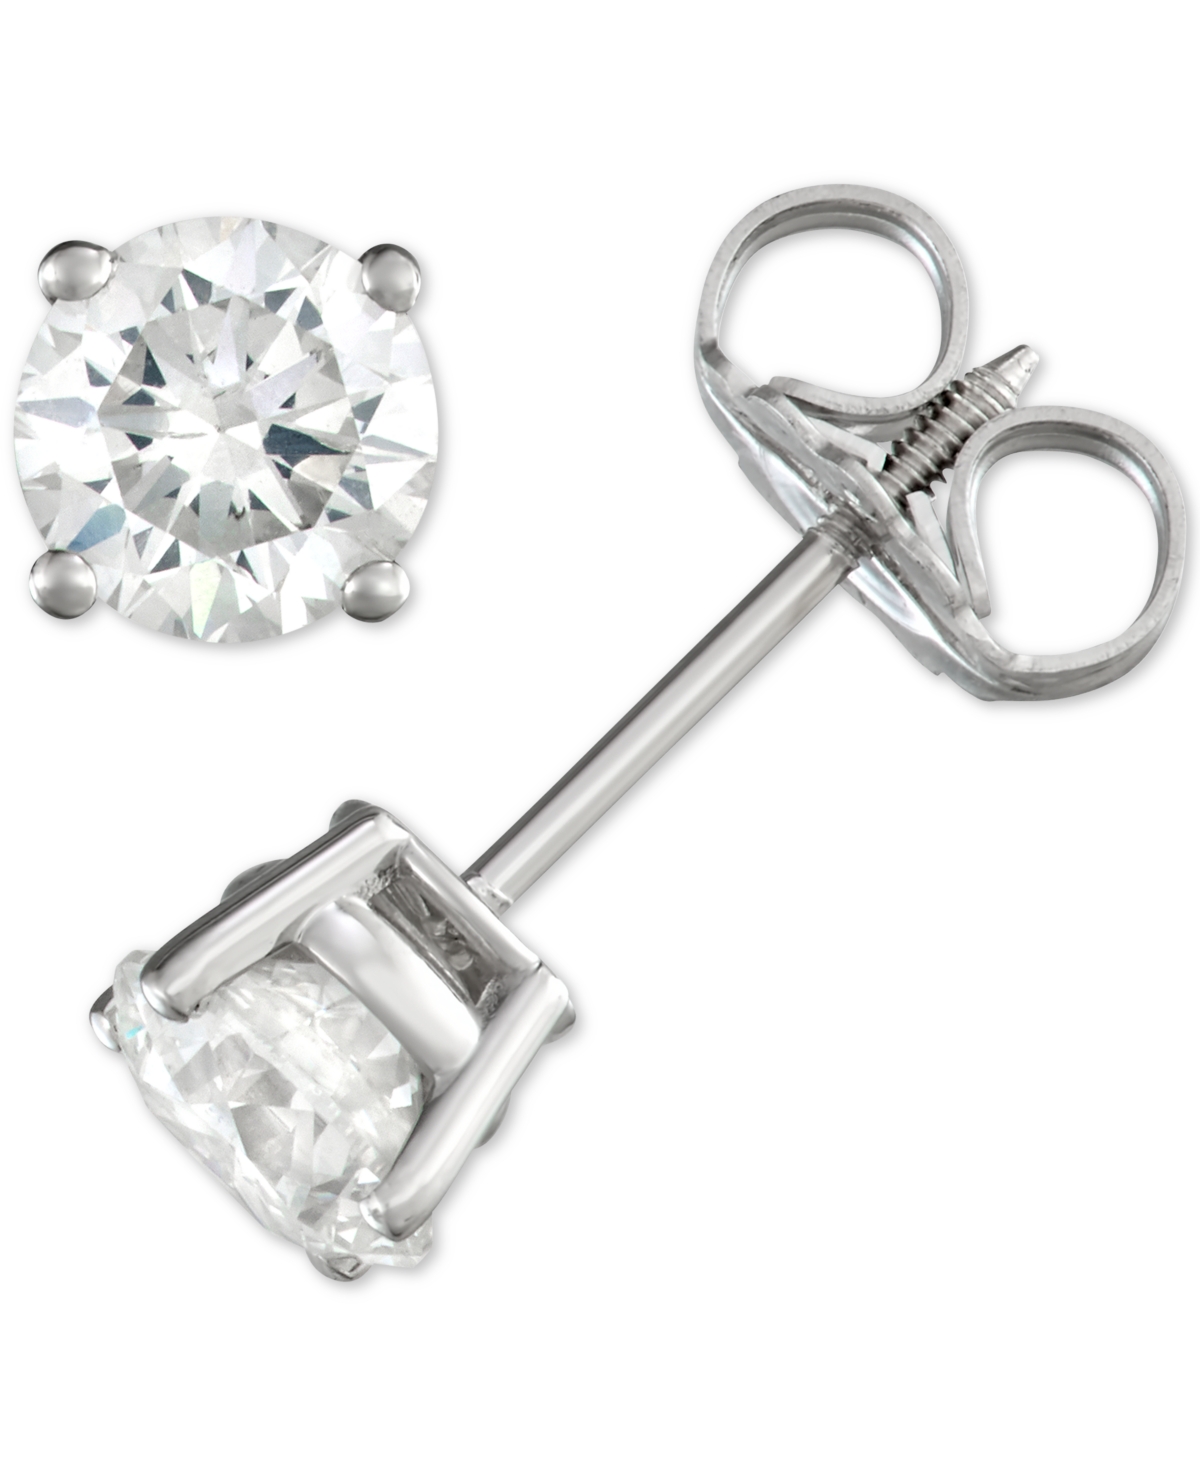 Diamond Stud Earrings (1 ct. t.w.) in 14k White, Yellow or Rose Gold - White Gold